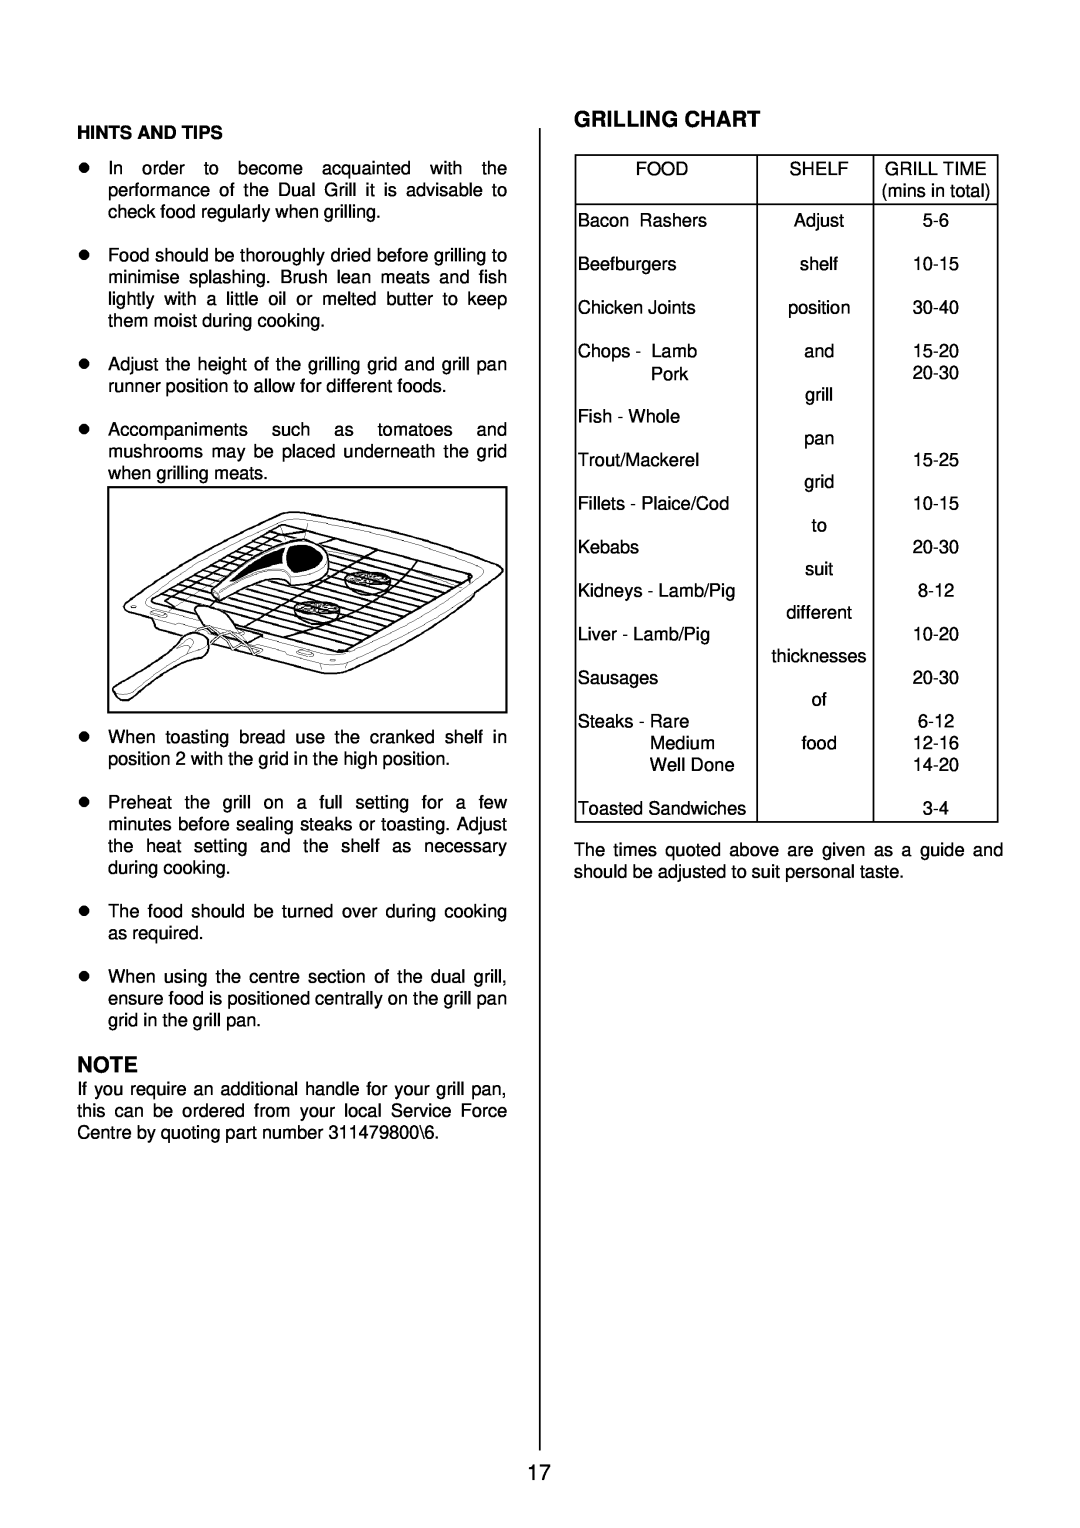 Tricity Bendix SIE 532 installation instructions Grilling Chart, Hints And Tips 